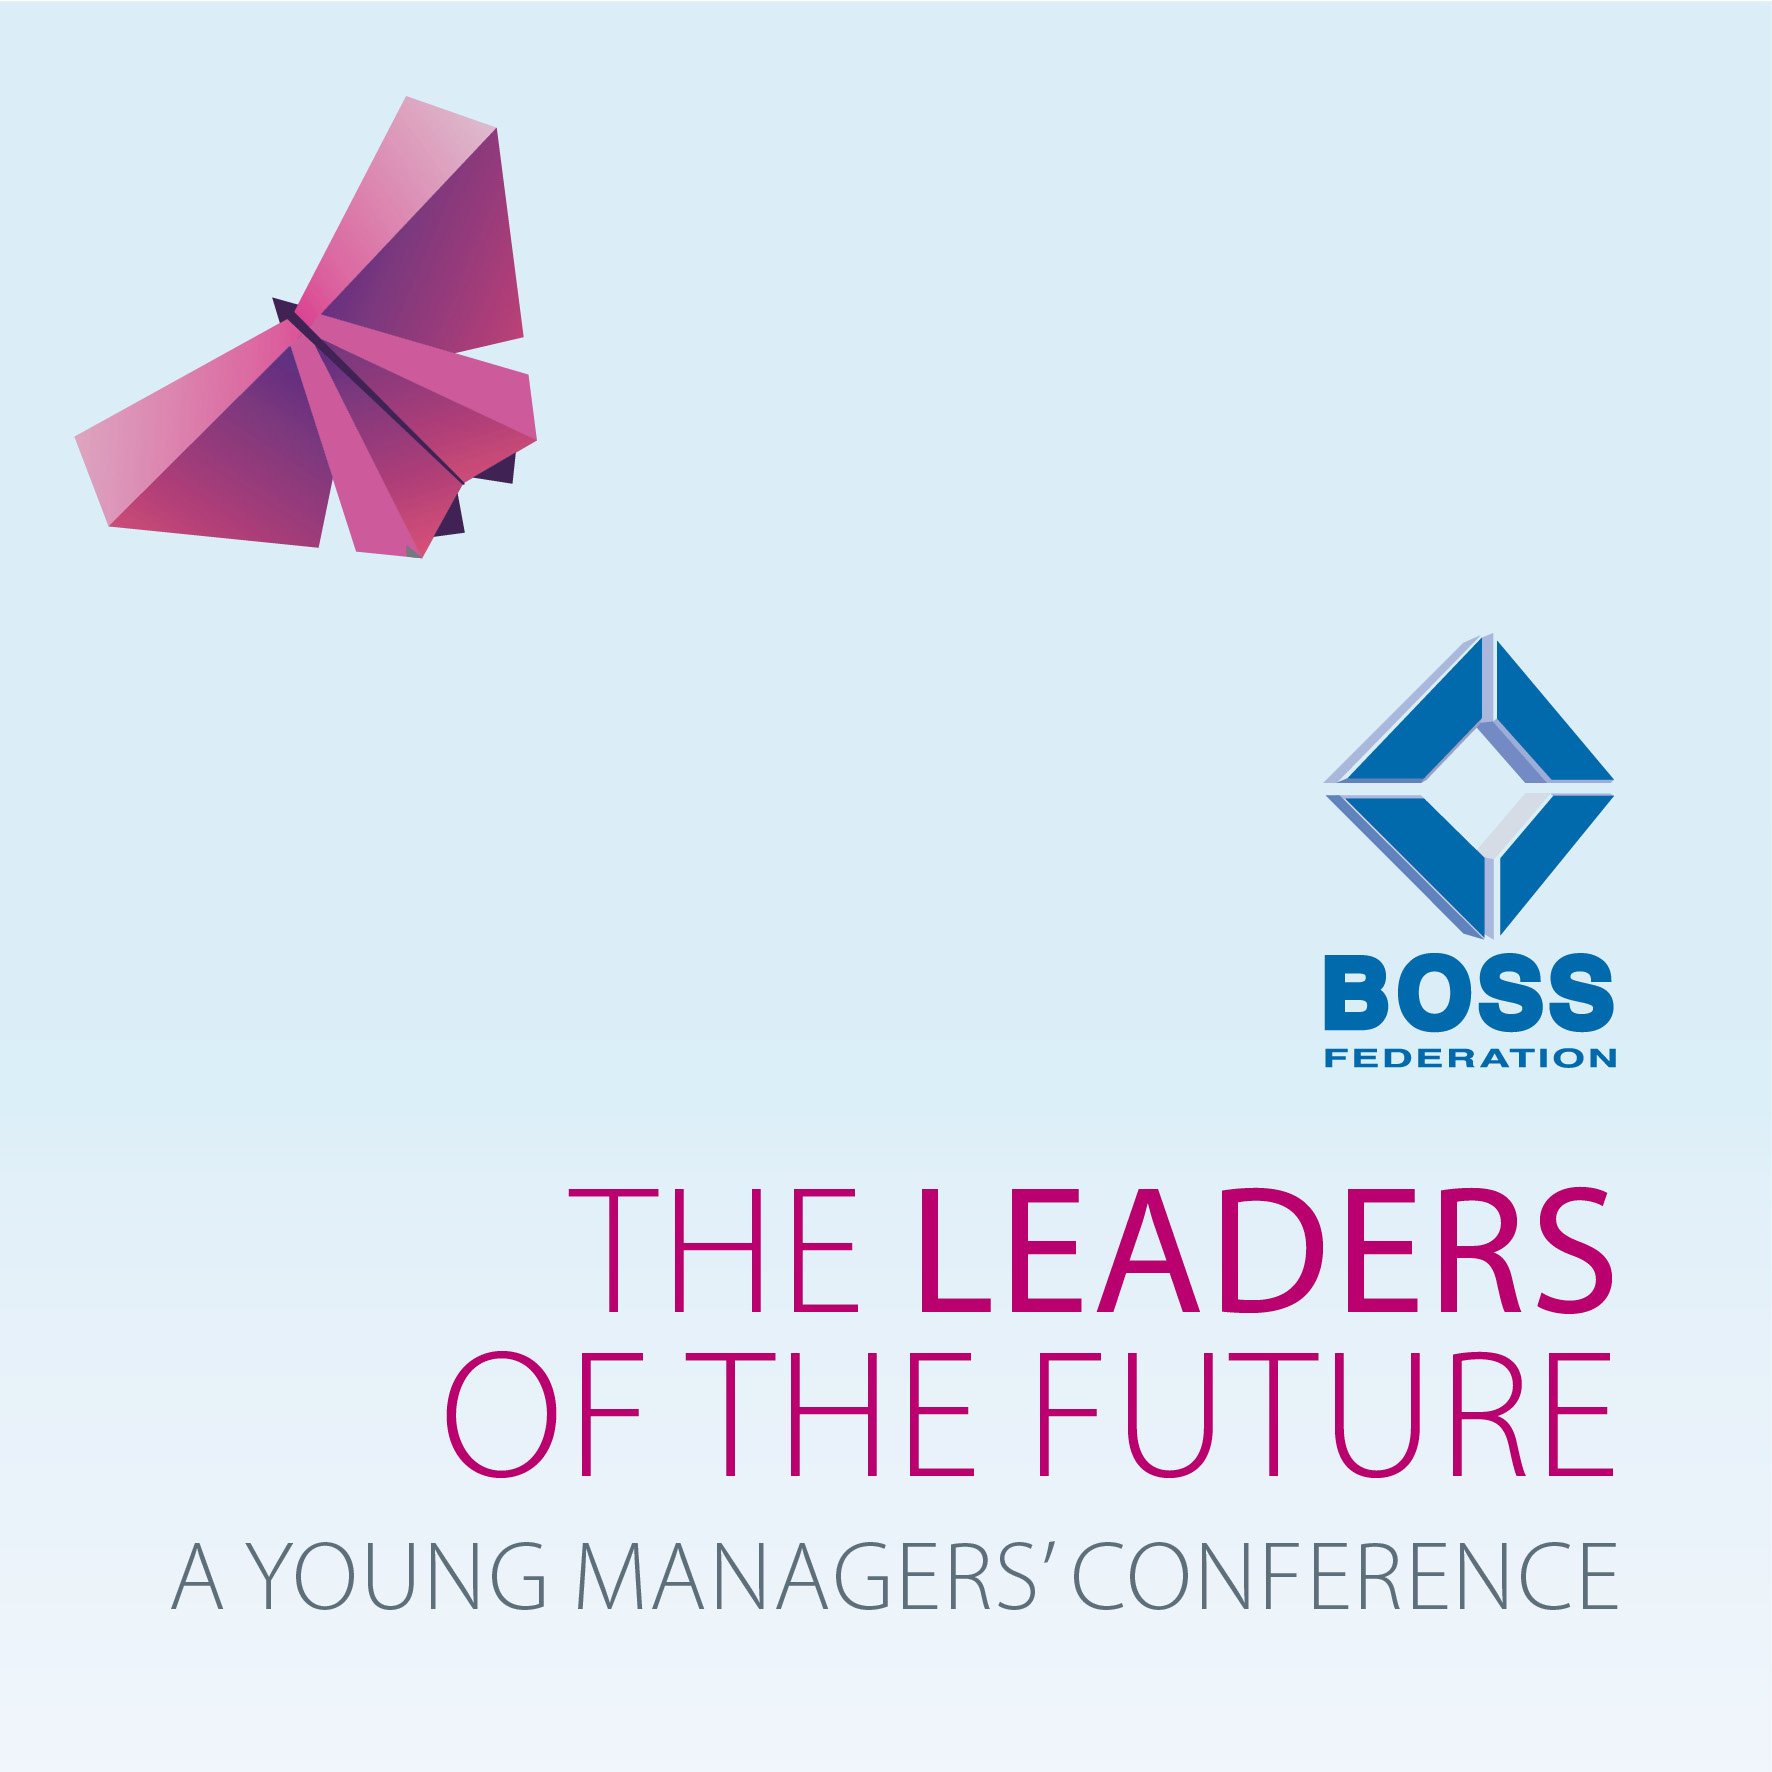 BOSS Young Managers' Conference - book your place today